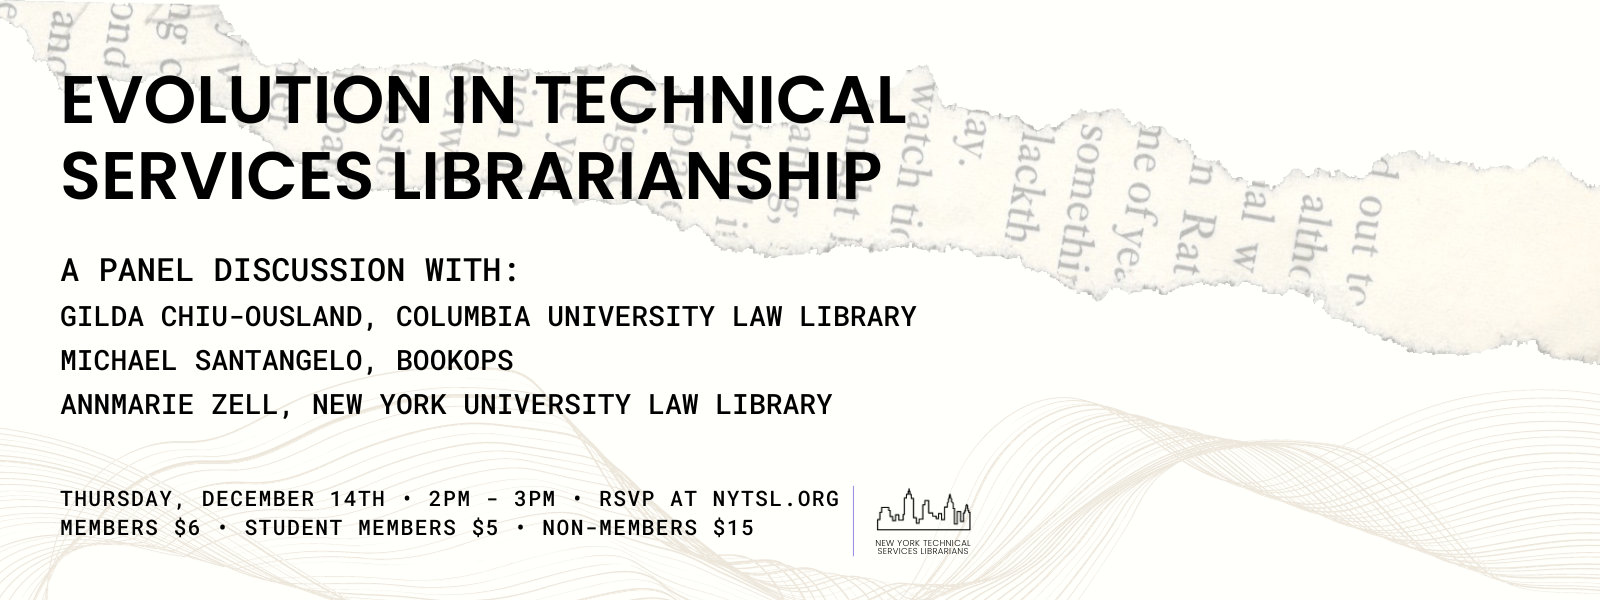 Image Description: Off white rectangle with a background image of a strip of a torn page with text on the top, and wavy, thin lines on the bottom. Text in the foreground reads: “Evolution in Technical Services Librarianship / A Panel Discussion with Gilda Chiu-Ousland, Columbia University Law Library / Michael Santangelo, BookOps / Annmarie Zell, New York University Law Library / Thursday 14th • 2PM - 3PM • RSVP AT NYTSL.ORG / Members $6 • Student members $5 • Non-members $15.” Bottom right is a graphic of black outline of the New York City skyline followed by black text that reads “New York Technical Services Librarians.” End of image description.